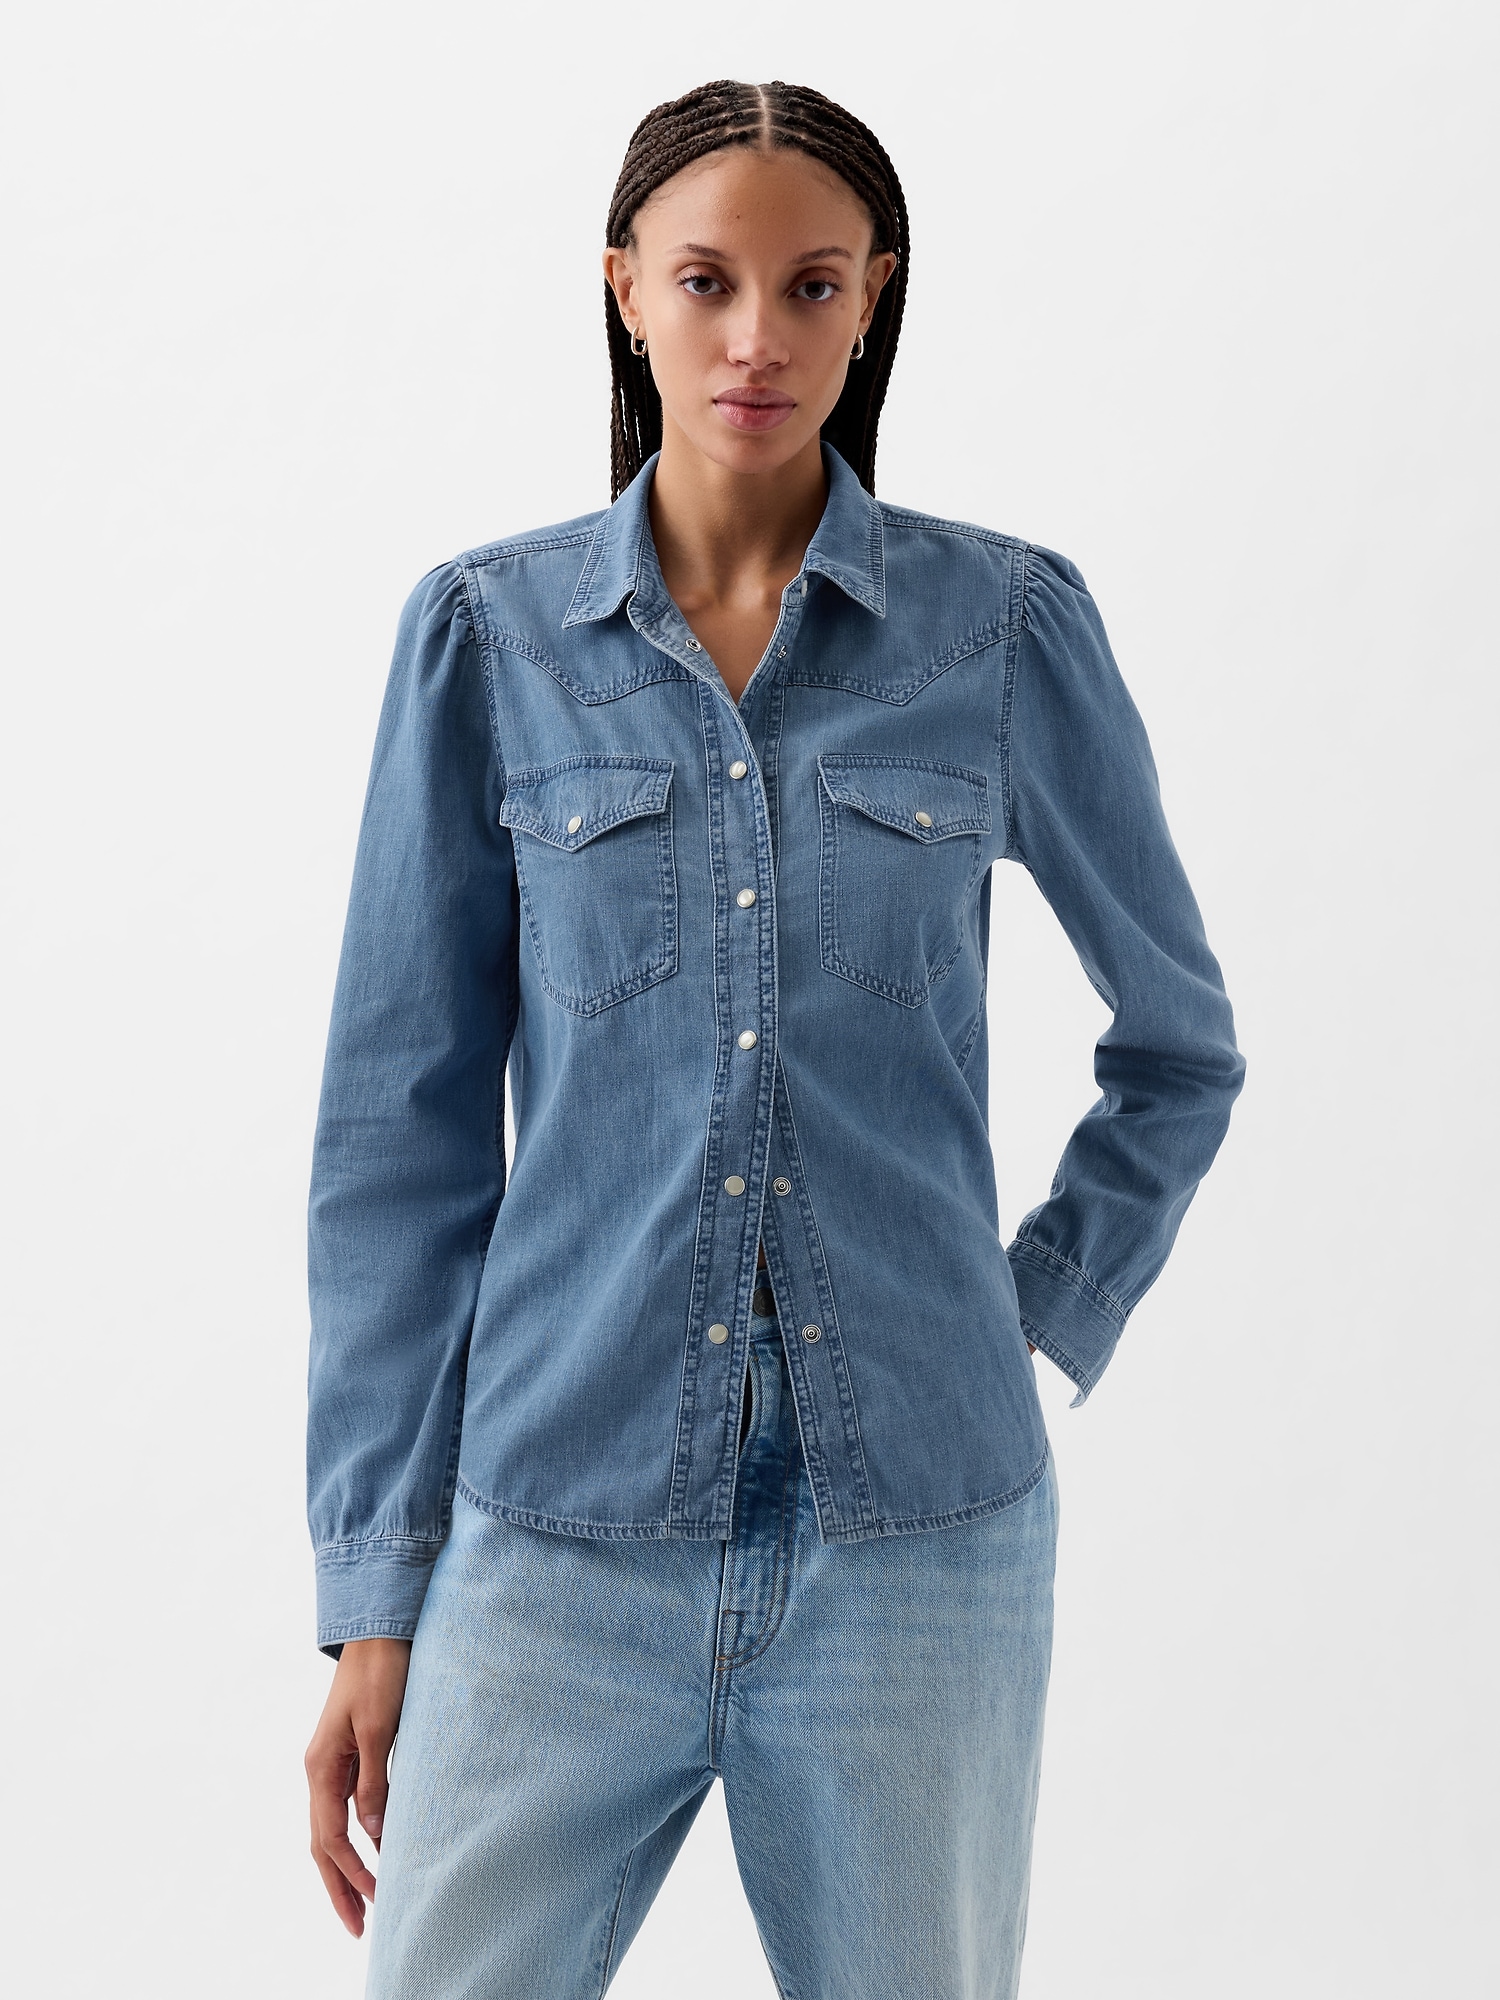 Modish Denim Shirts For Women: Boost Your Style Quotient